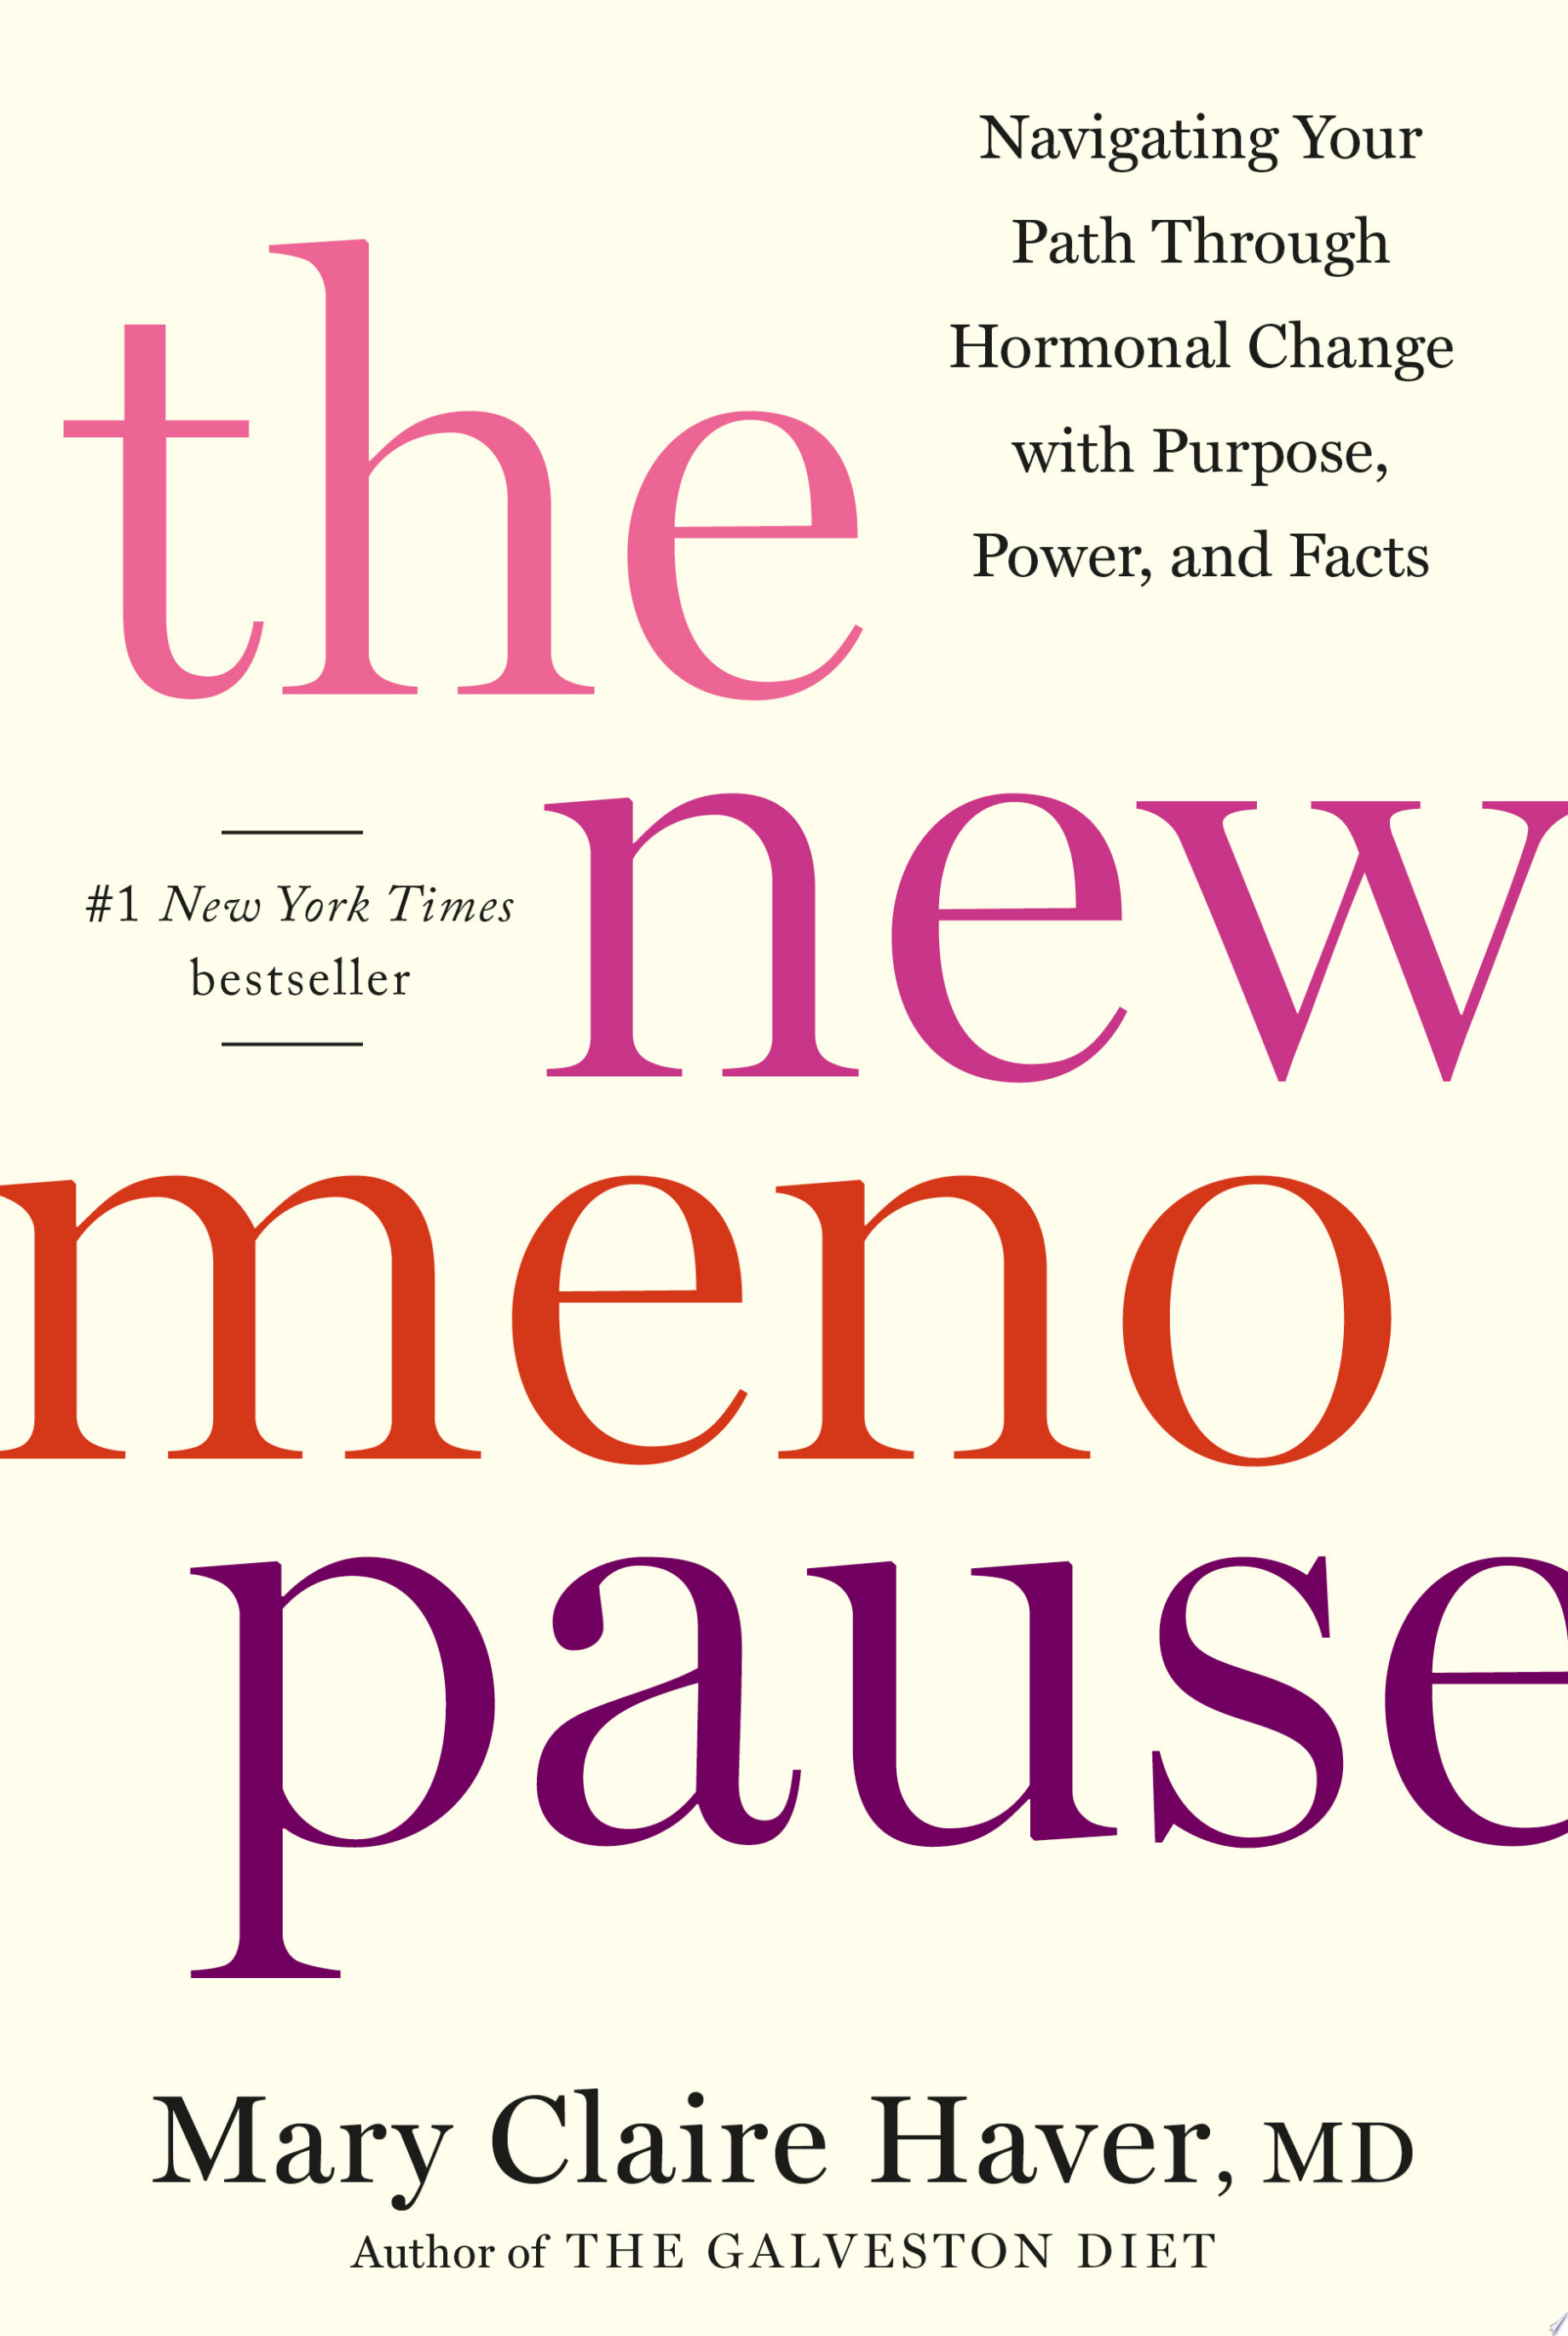 Image for "The New Menopause"